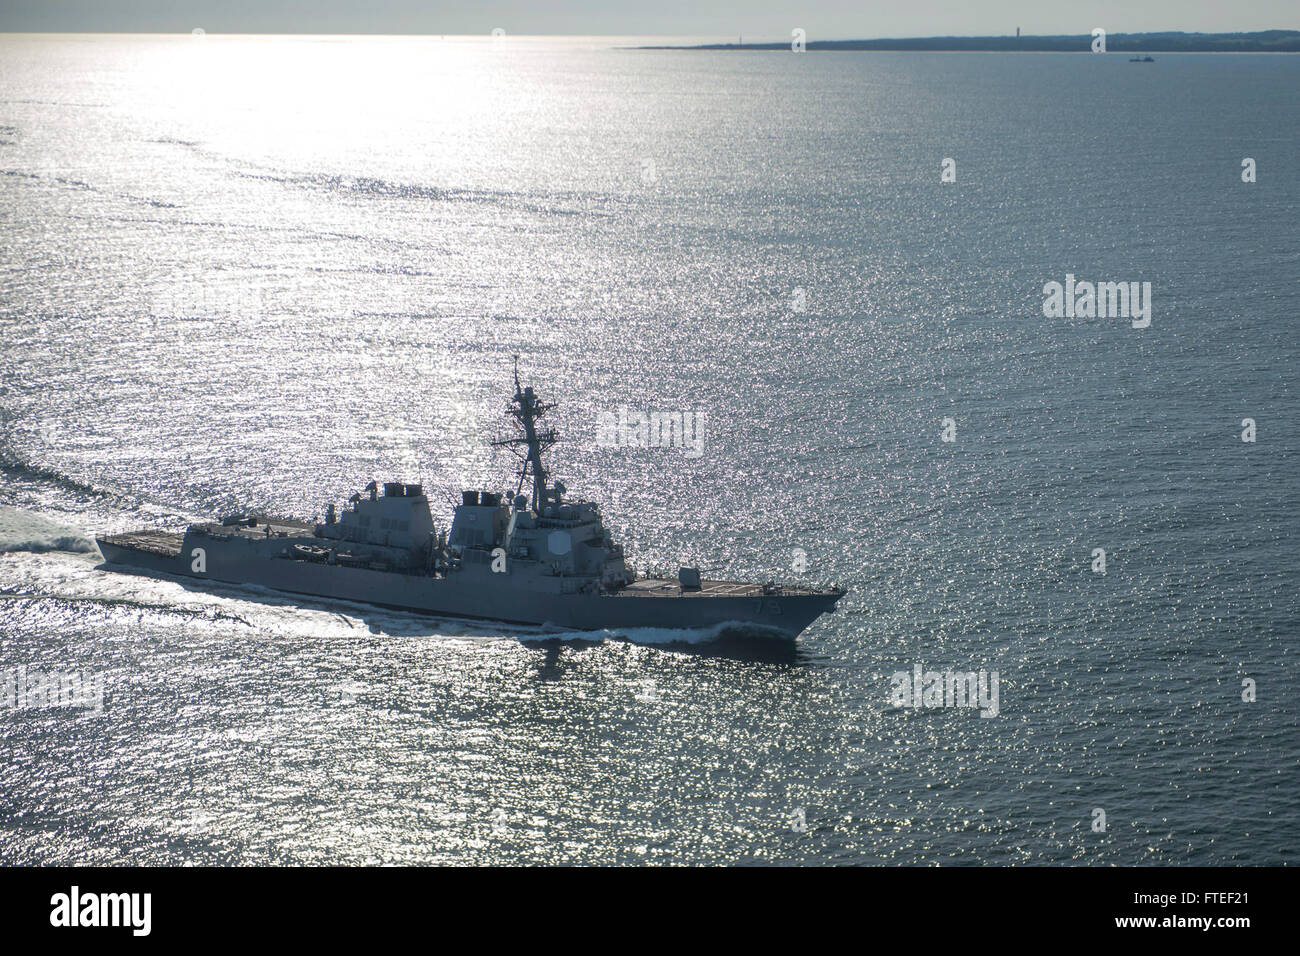 140615-N-EZ054-158  BALTIC SEA (June 15, 2014) - The Arleigh Burke class guided-missile destroyer USS Oscar Austin (DDG79) is underway during Baltic Operations (BALTOPS) 2014. Now in its 42nd year, BALTOPS is an annual, multinational exercise to enhance maritime capabilities and interoperability, and to support regional stability. (U.S. Navy photo by Mass Communication Specialist 3rd Class Luis R. Chavez Jr/Released) Stock Photo